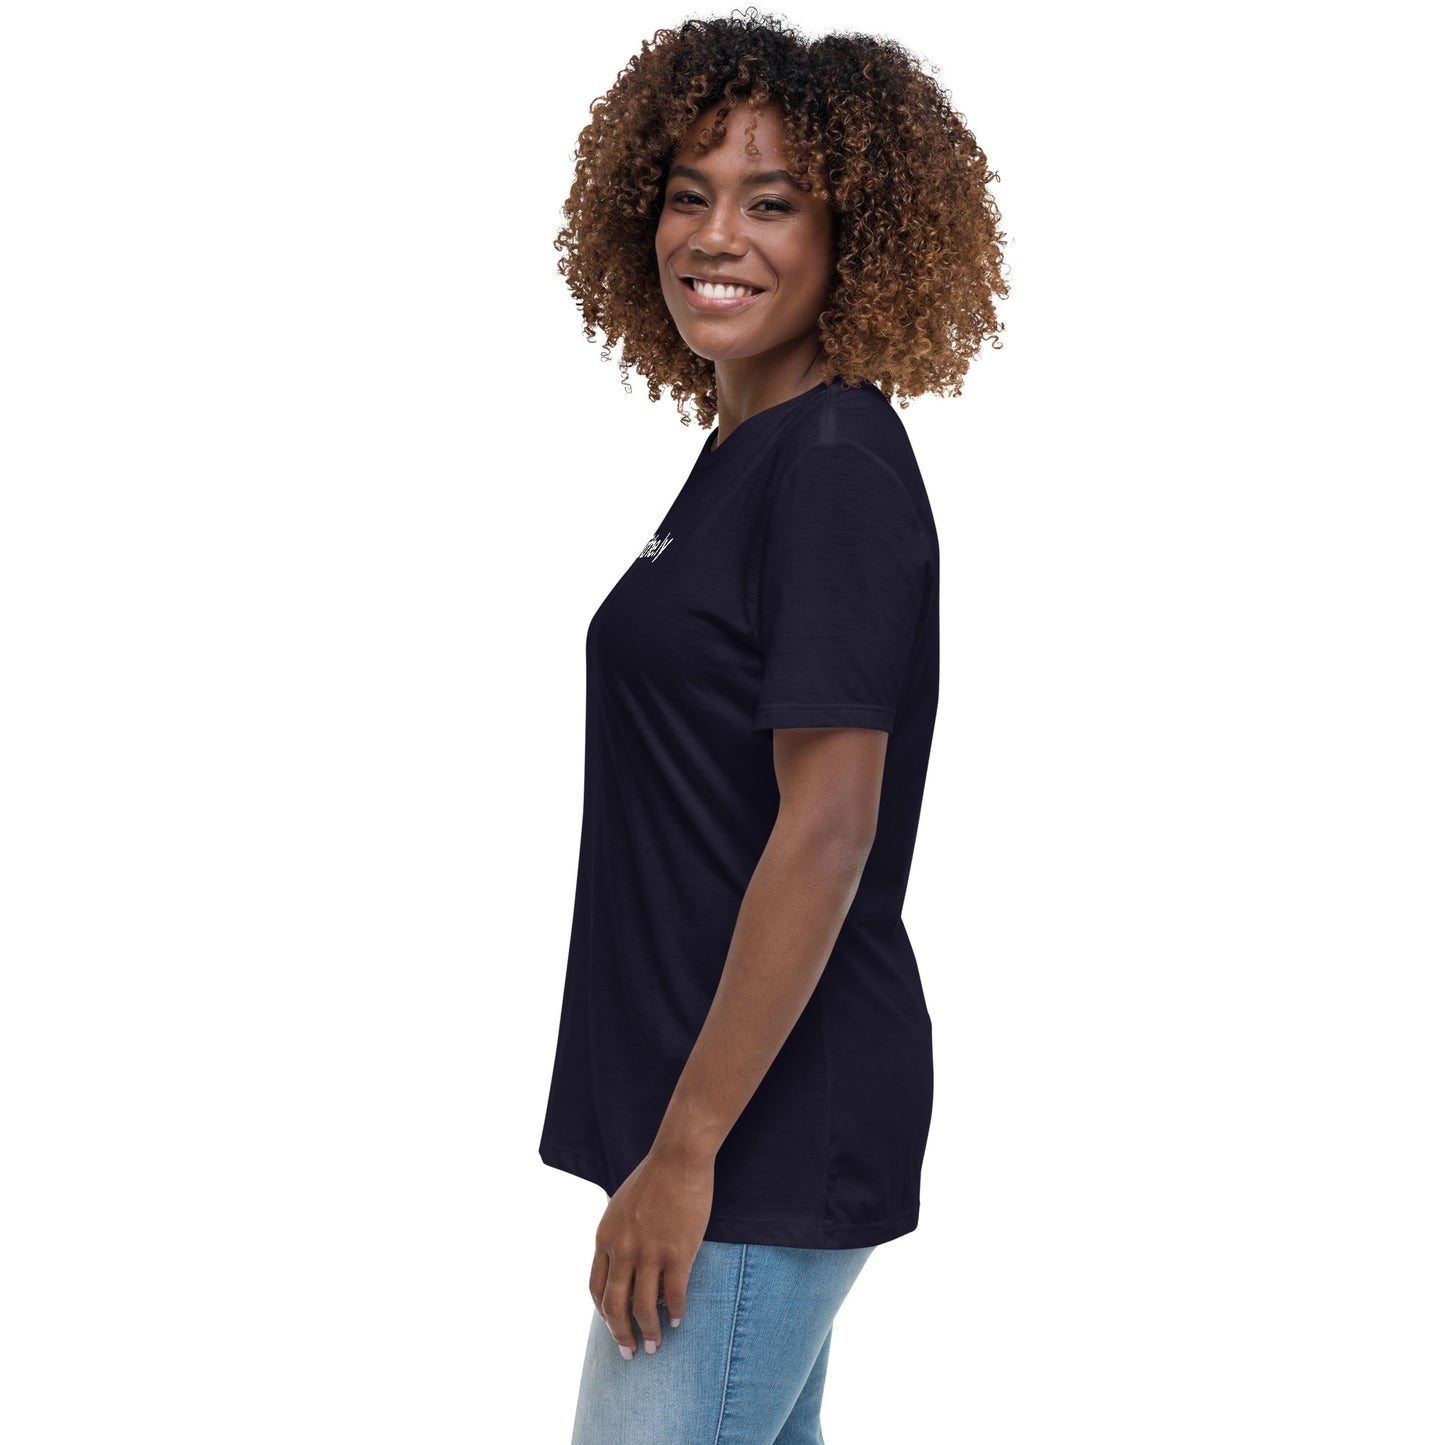 Tithely Womens T-Shirt